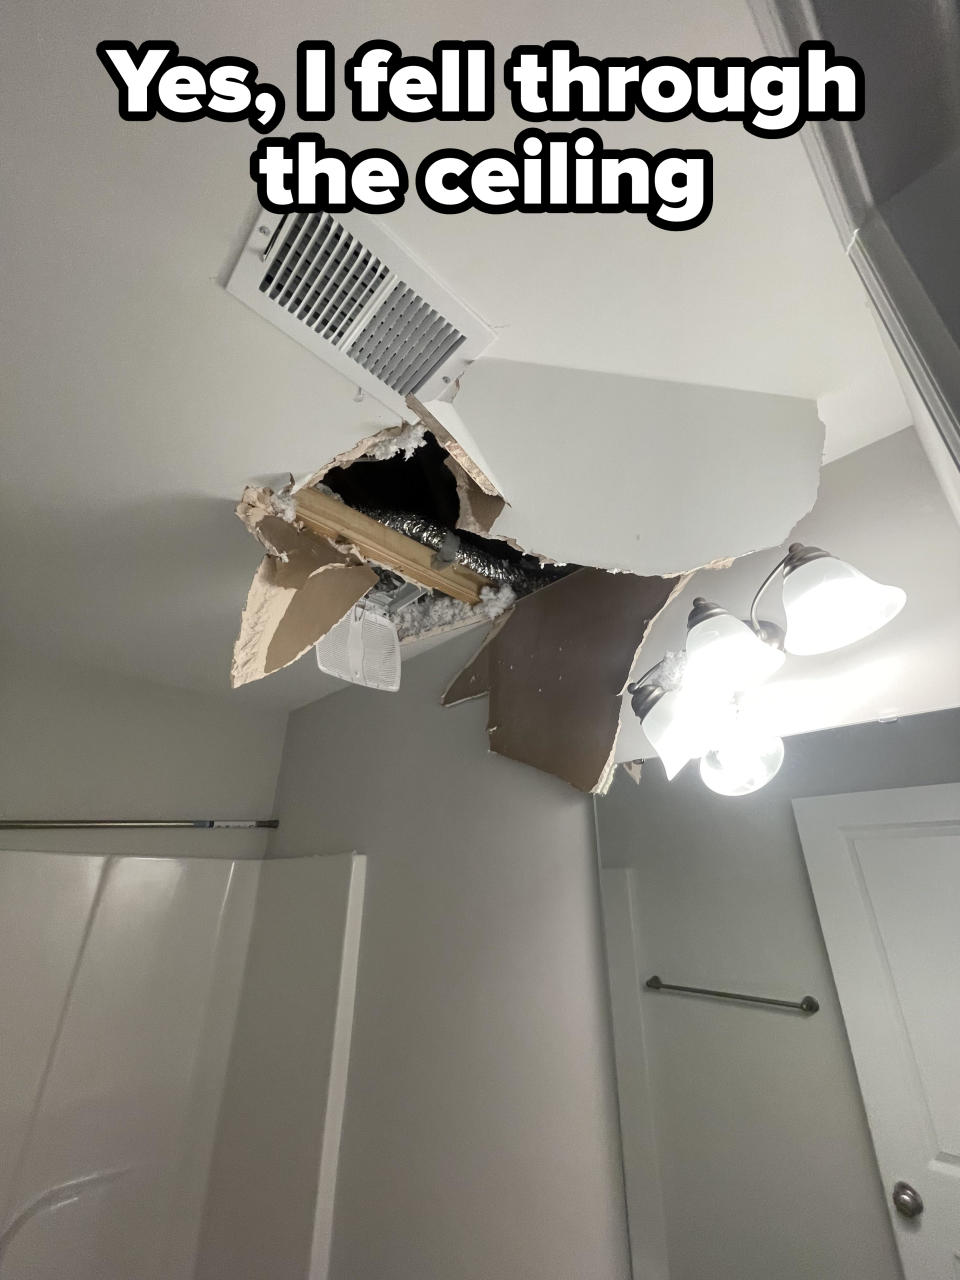 A huge hole in the ceiling with "Yes, I fell through the ceiling" caption